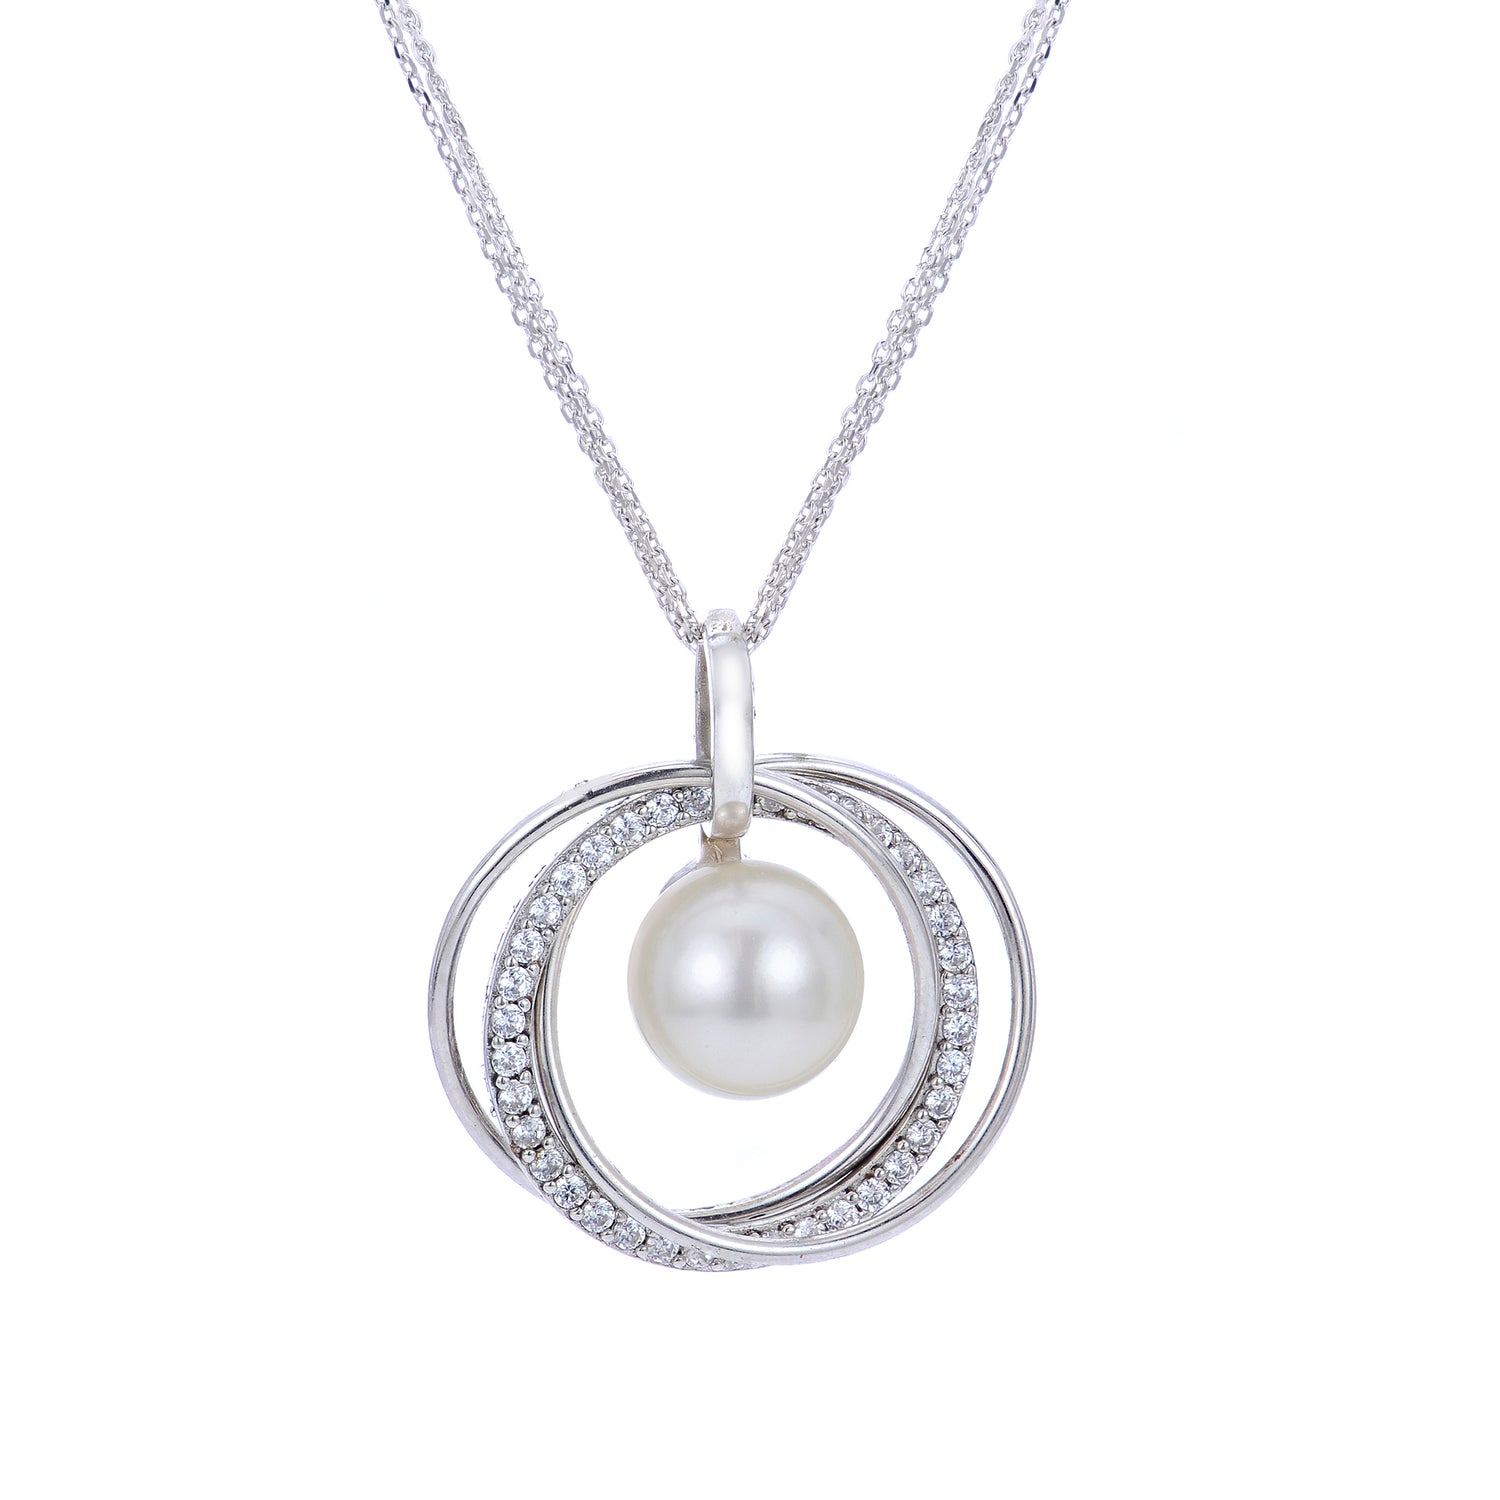 Pearl Fashion Necklace – Jewelry Creations Inc